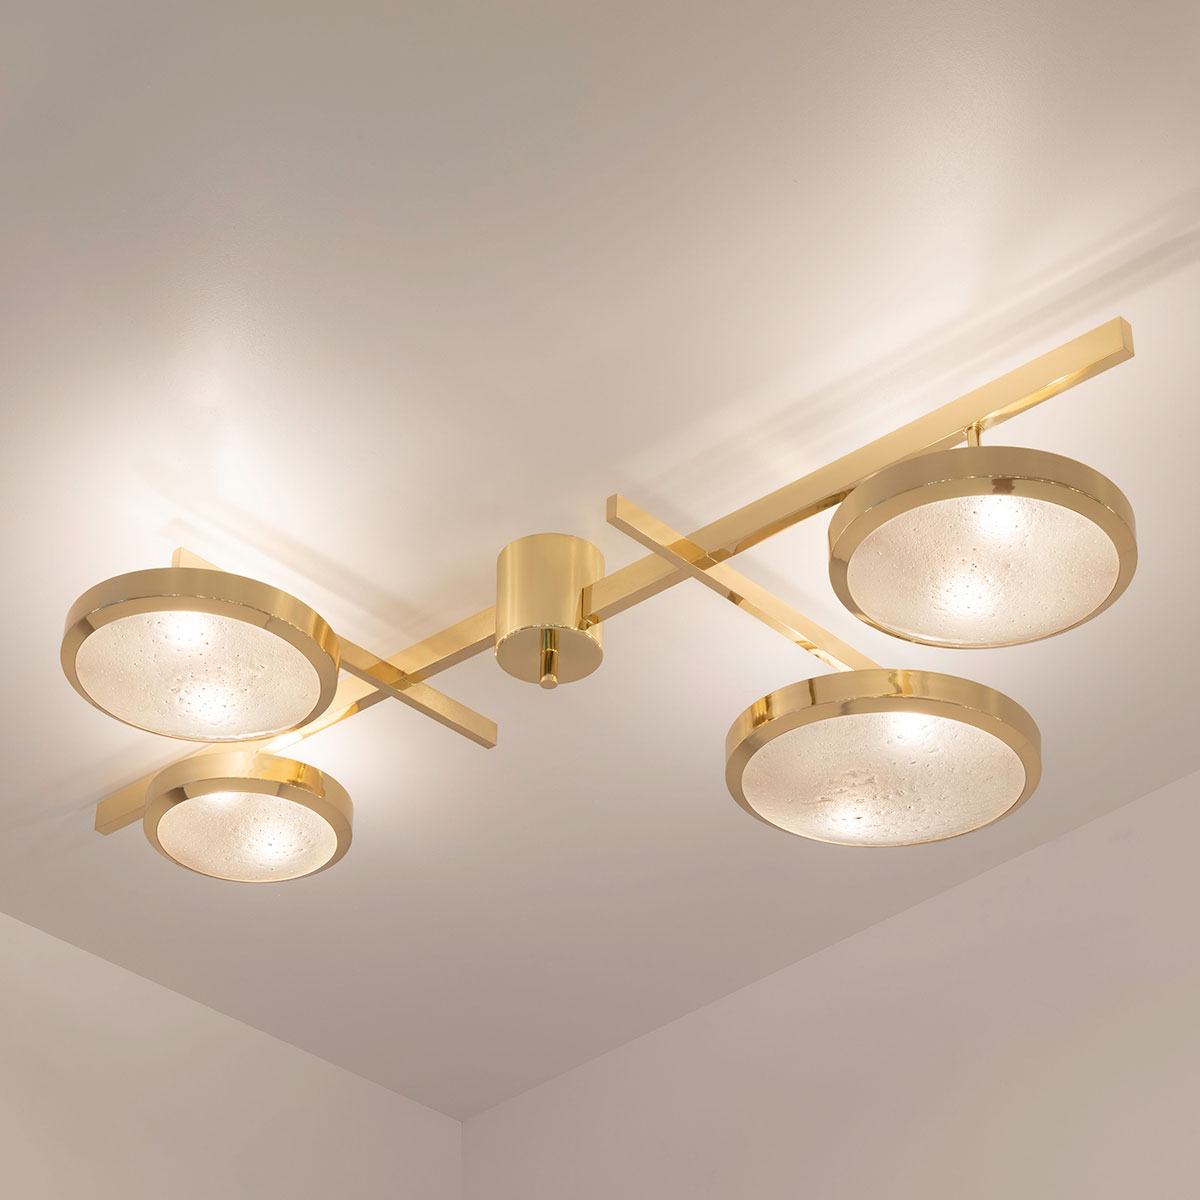 Tetrix ceiling light with polished brass finish by Gaspare Asaro